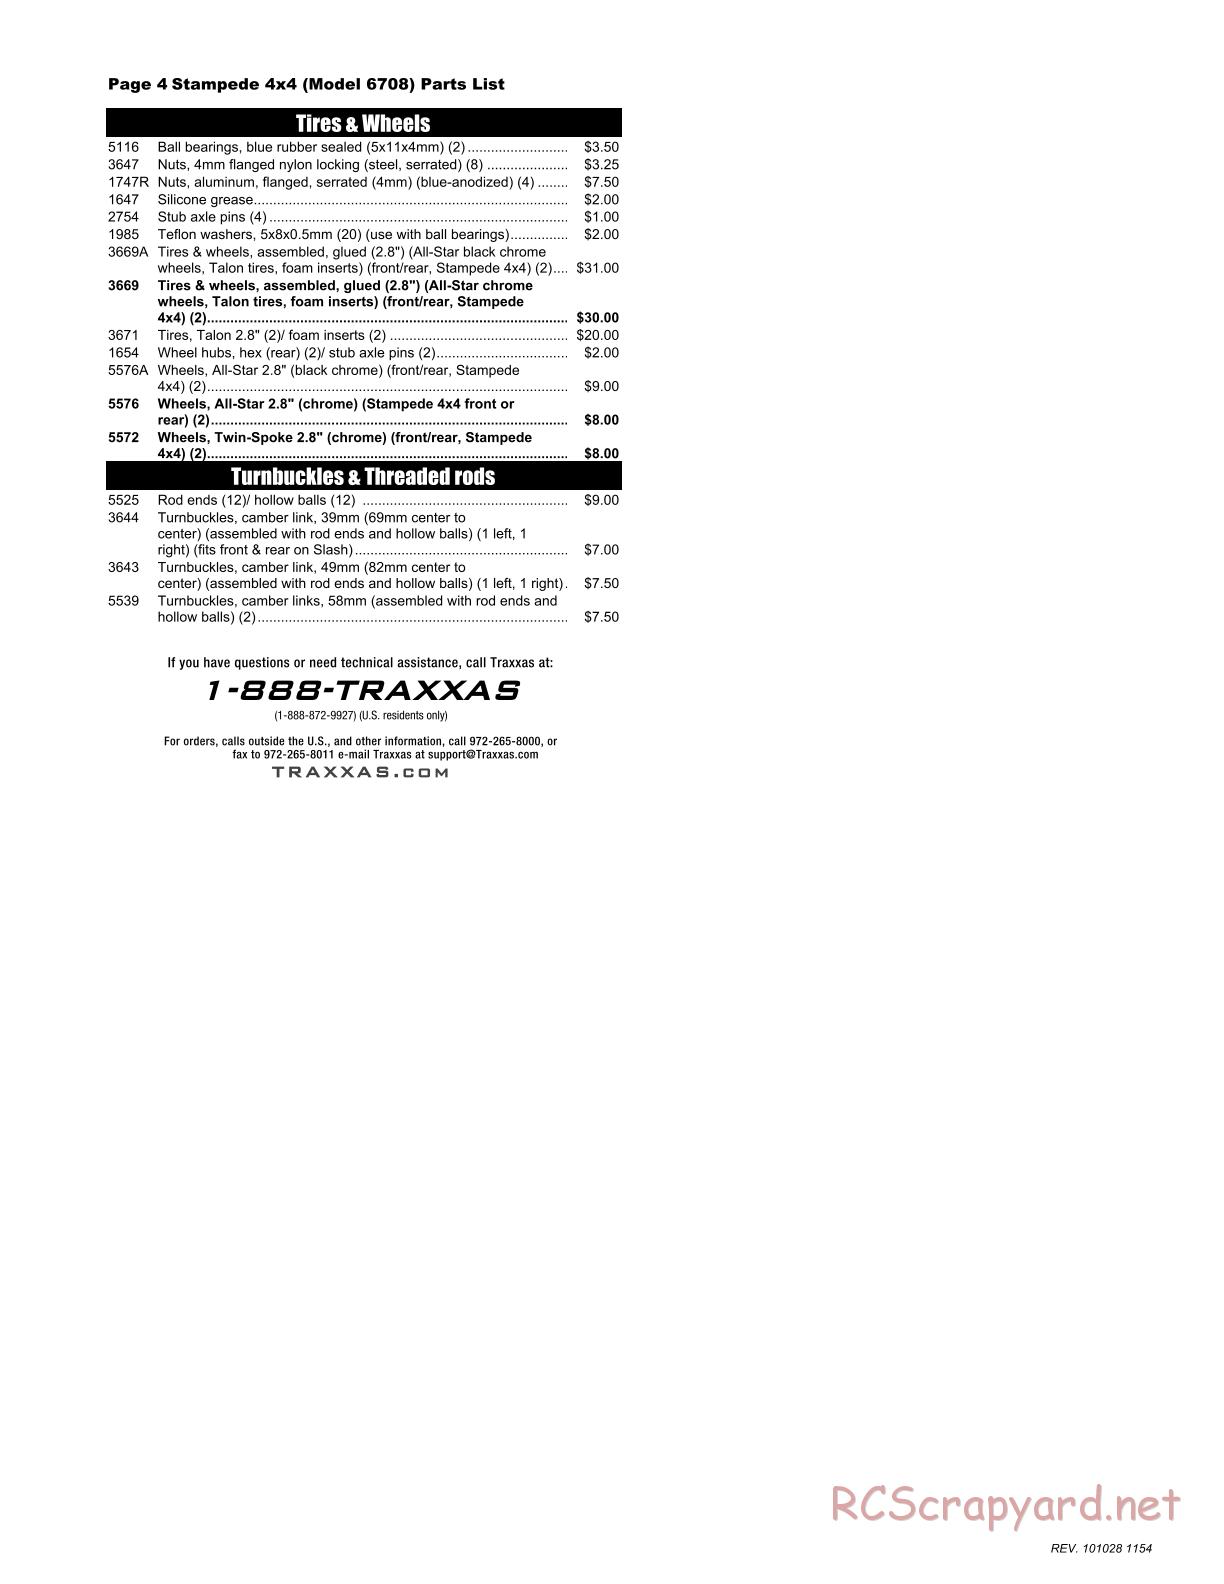 Traxxas - Stampede 4x4 VXL (2010) - Parts List - Page 4